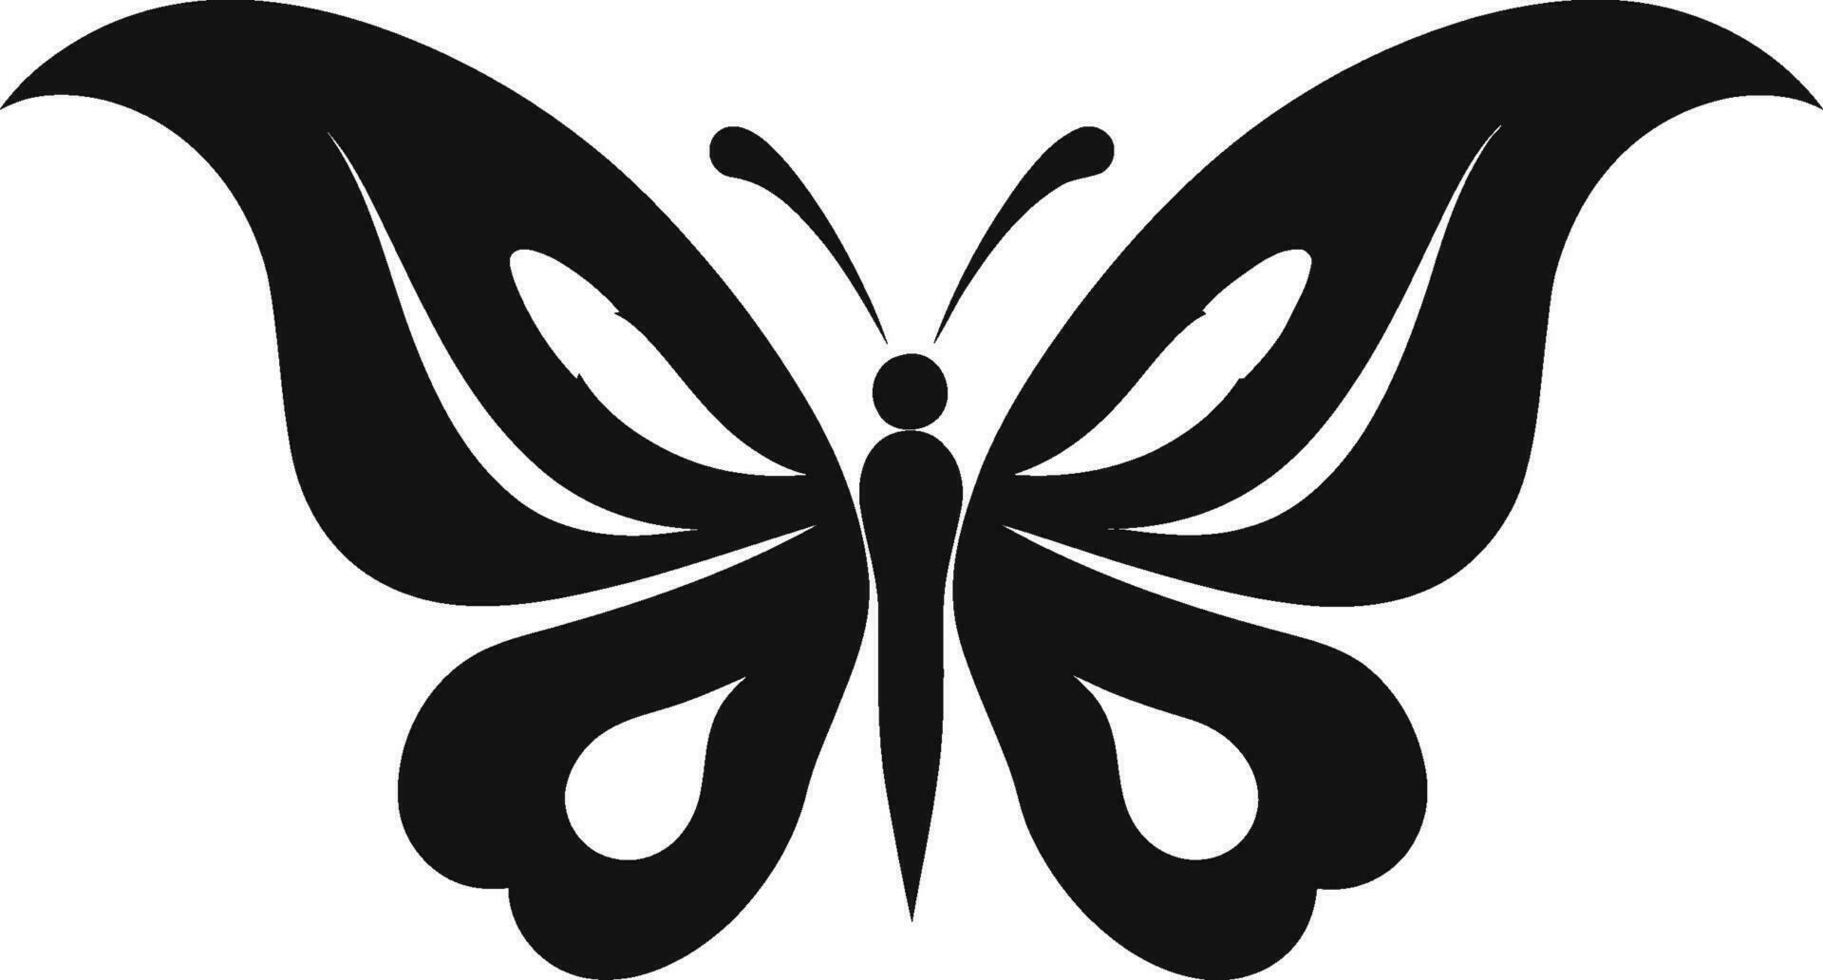 Delicate Elegance of Onyx Iconic Emblem Flight of Beauty Monochrome Aerial Majesty vector